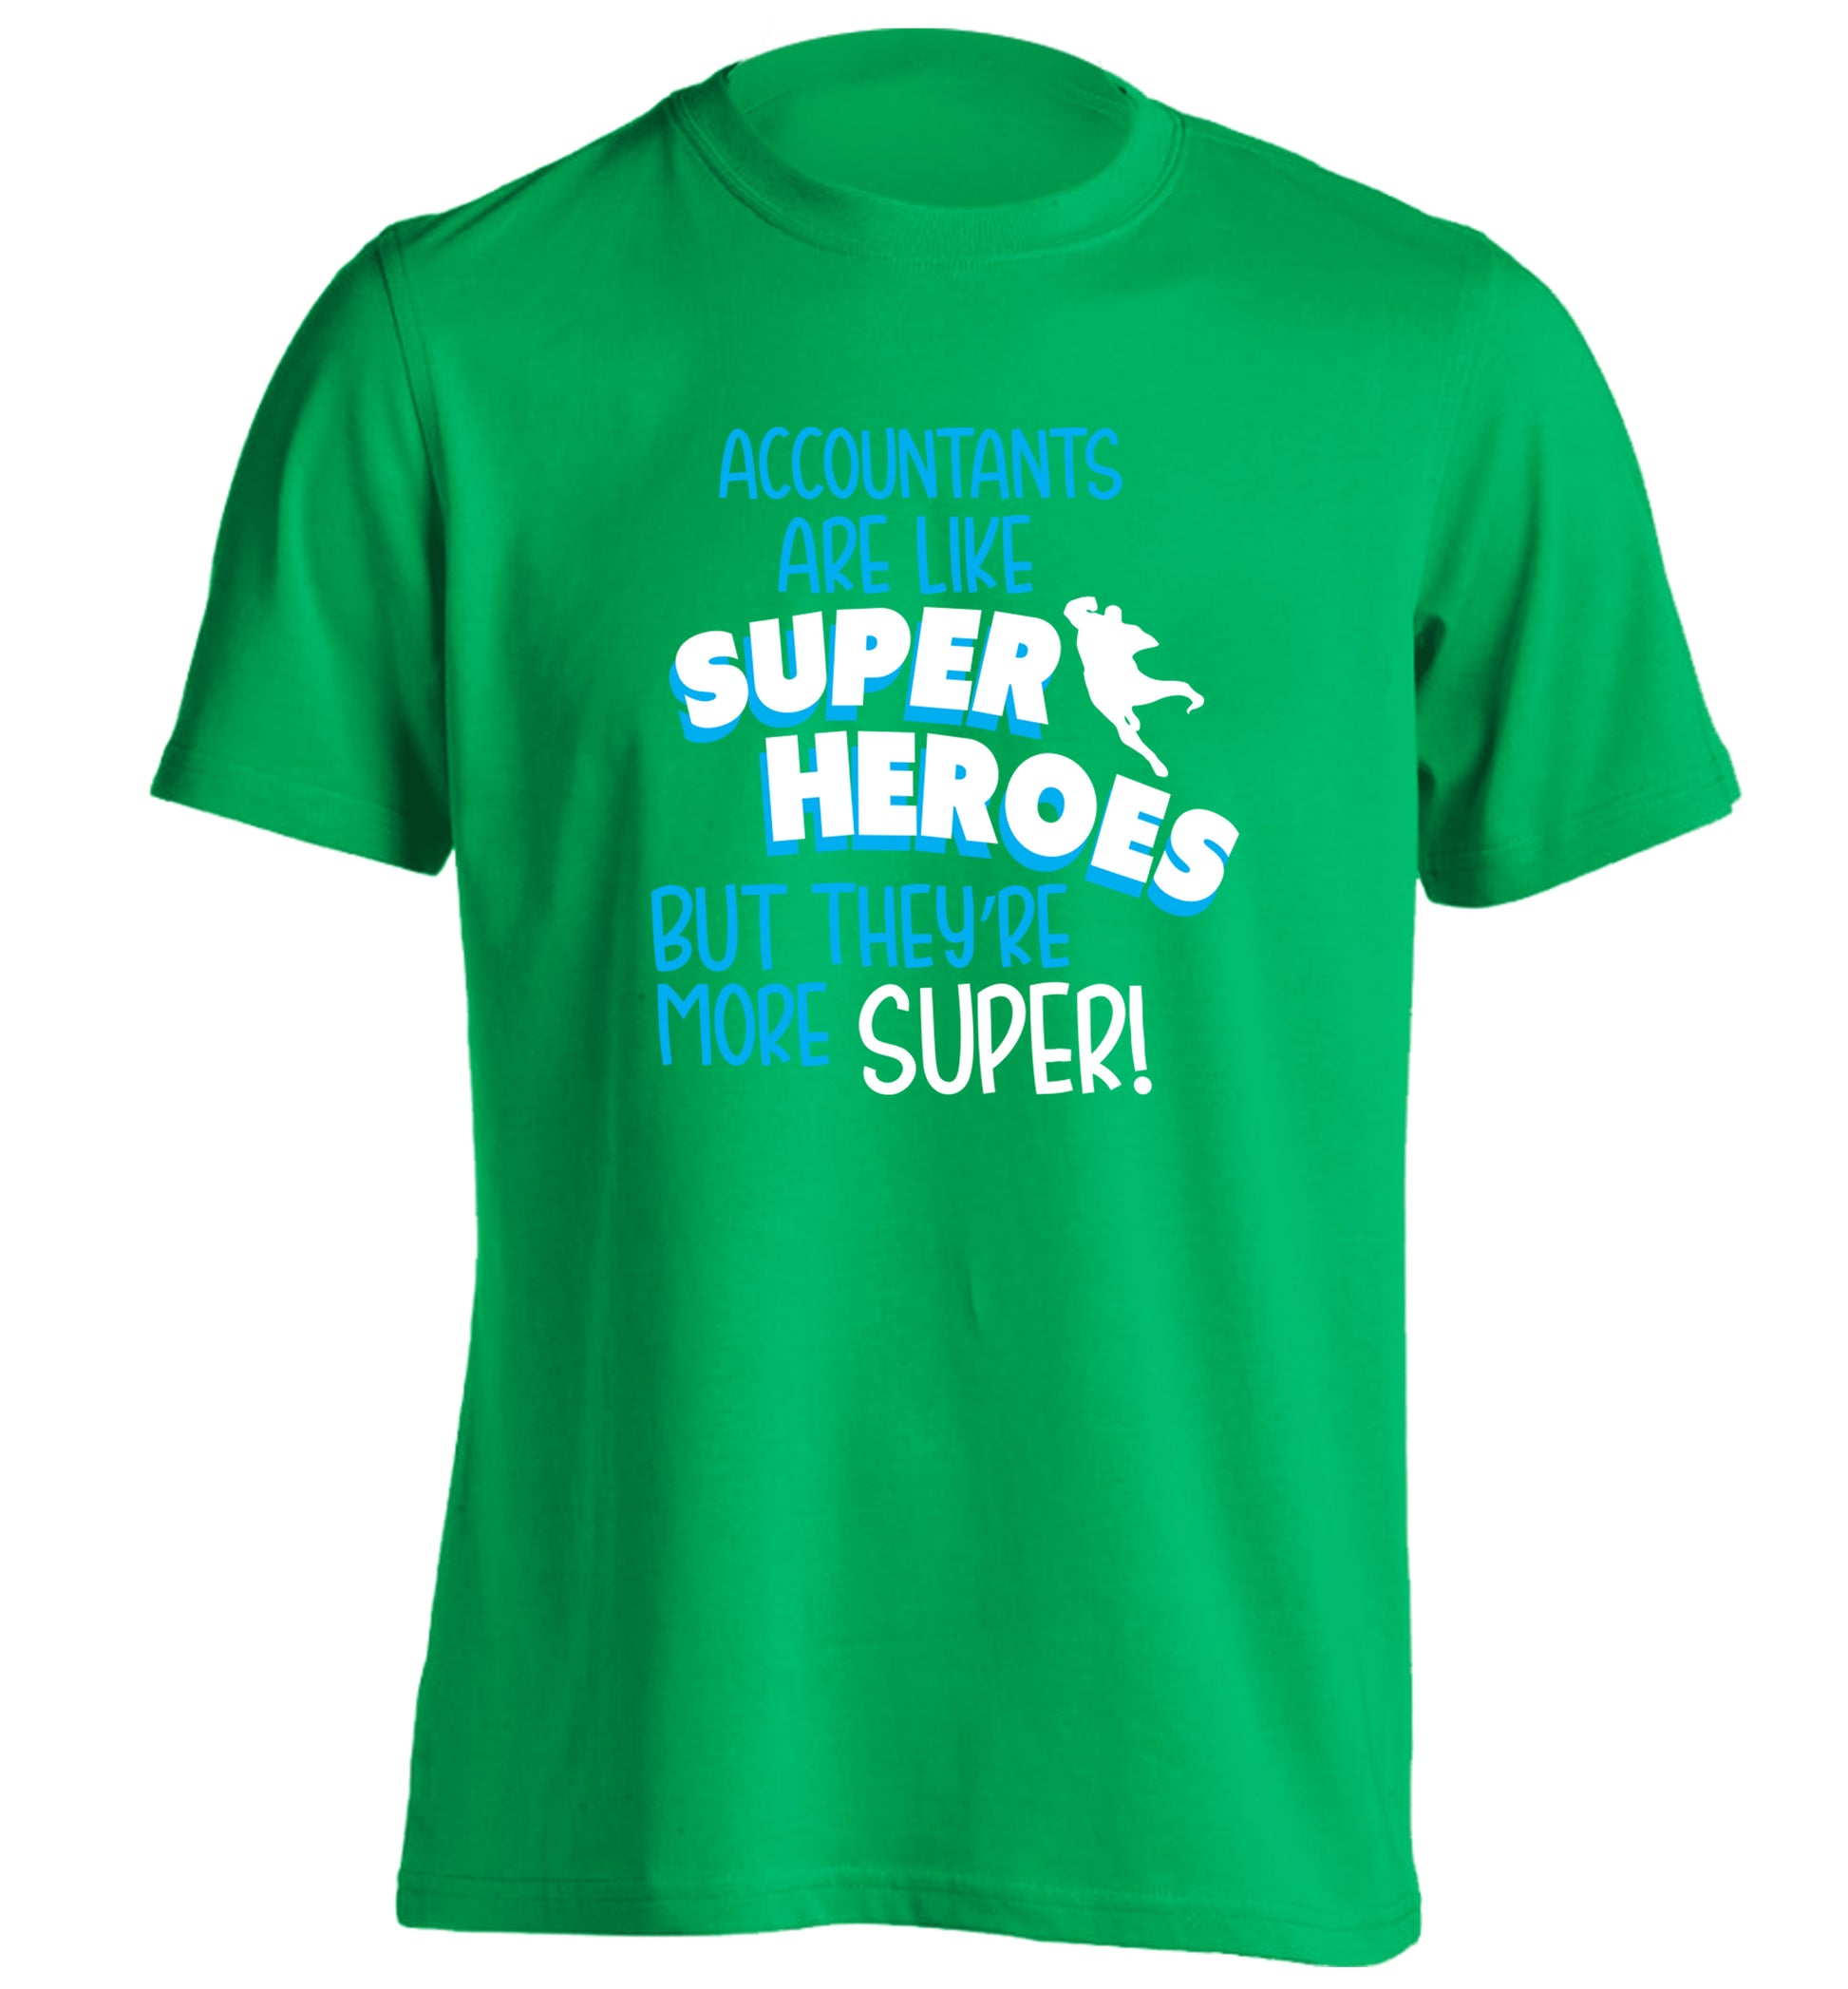 Accountants are like superheroes but they're more super adults unisex green Tshirt 2XL